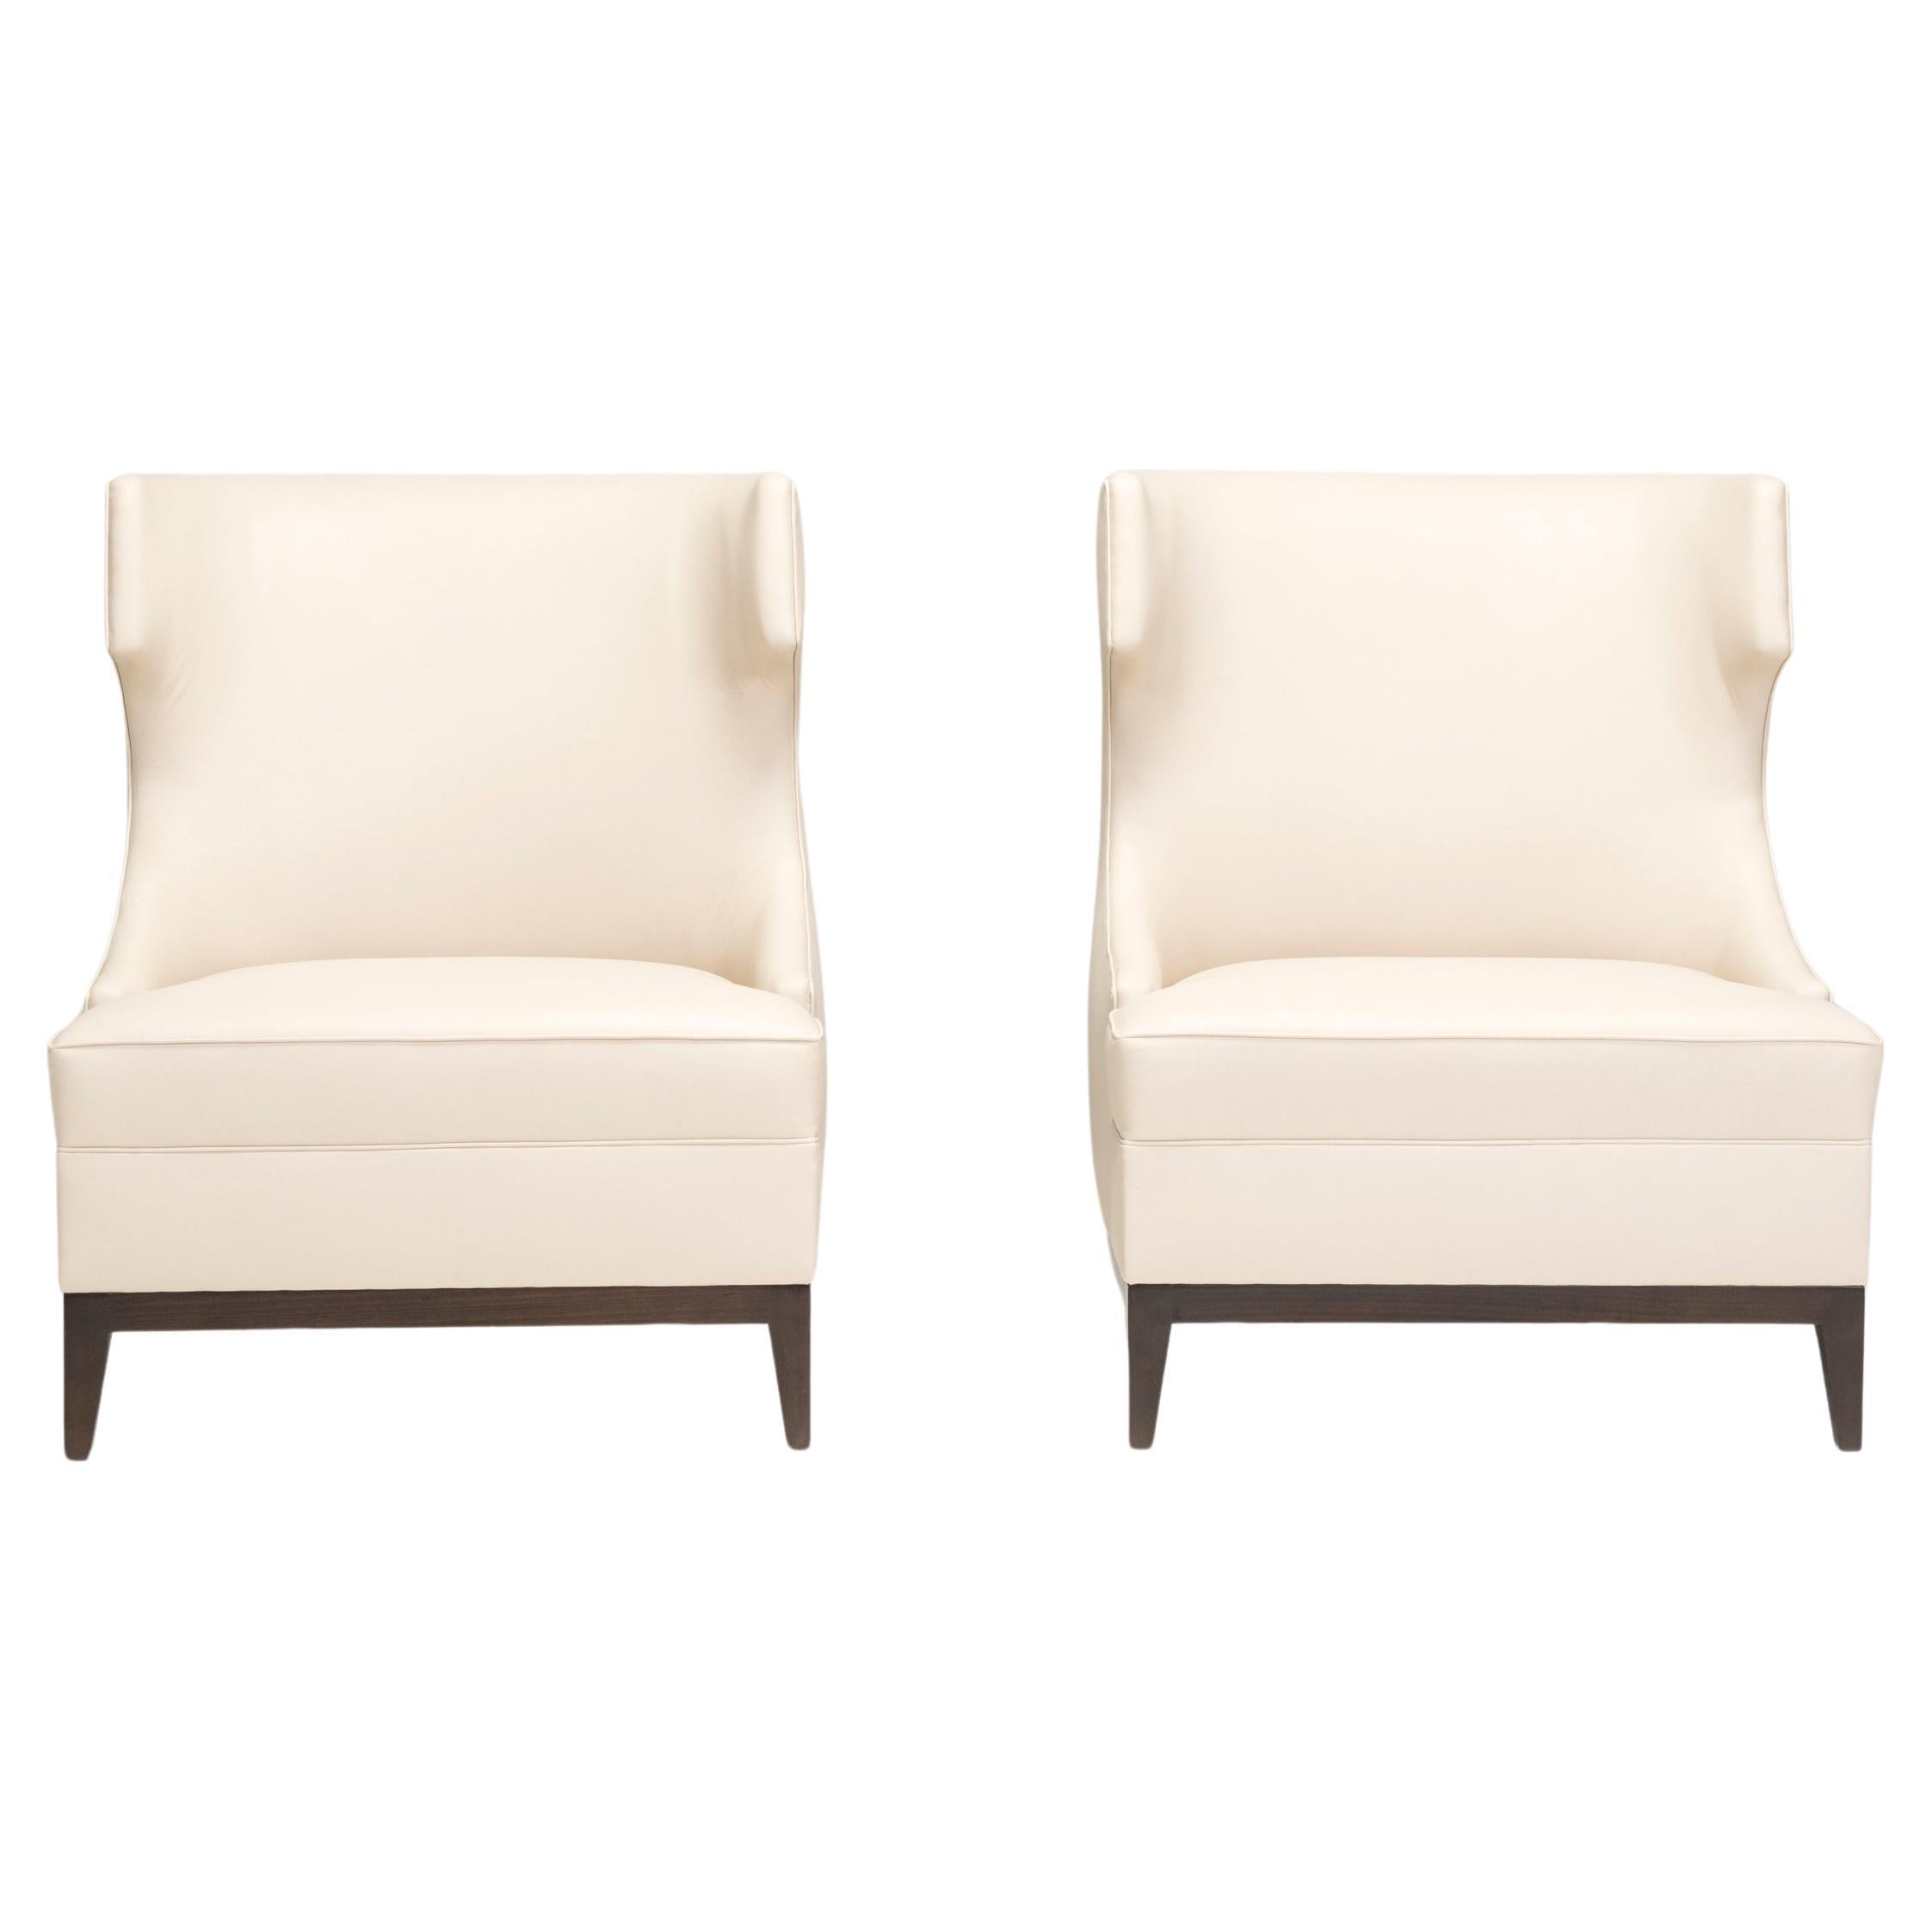 Bespoke Cream Leather High Back Wingback Armchairs, Set of Two For Sale